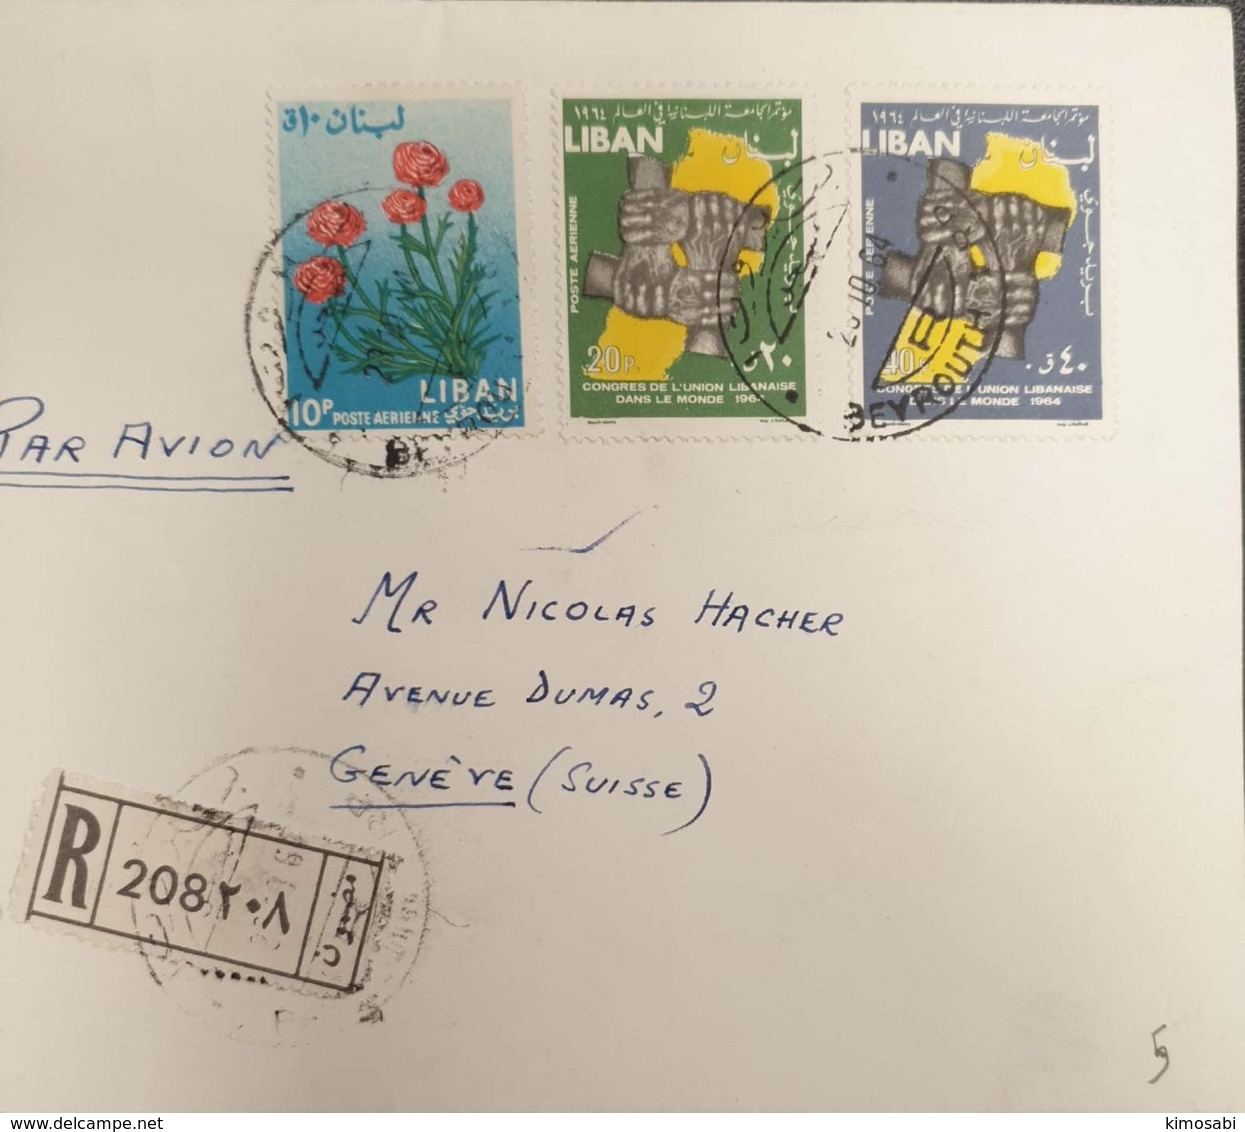 Lebanon Liban 1964 Cover From Beirut To Switzerland. Franked With Complete Set "Congres Ce L'union Libanaise" - Lebanon